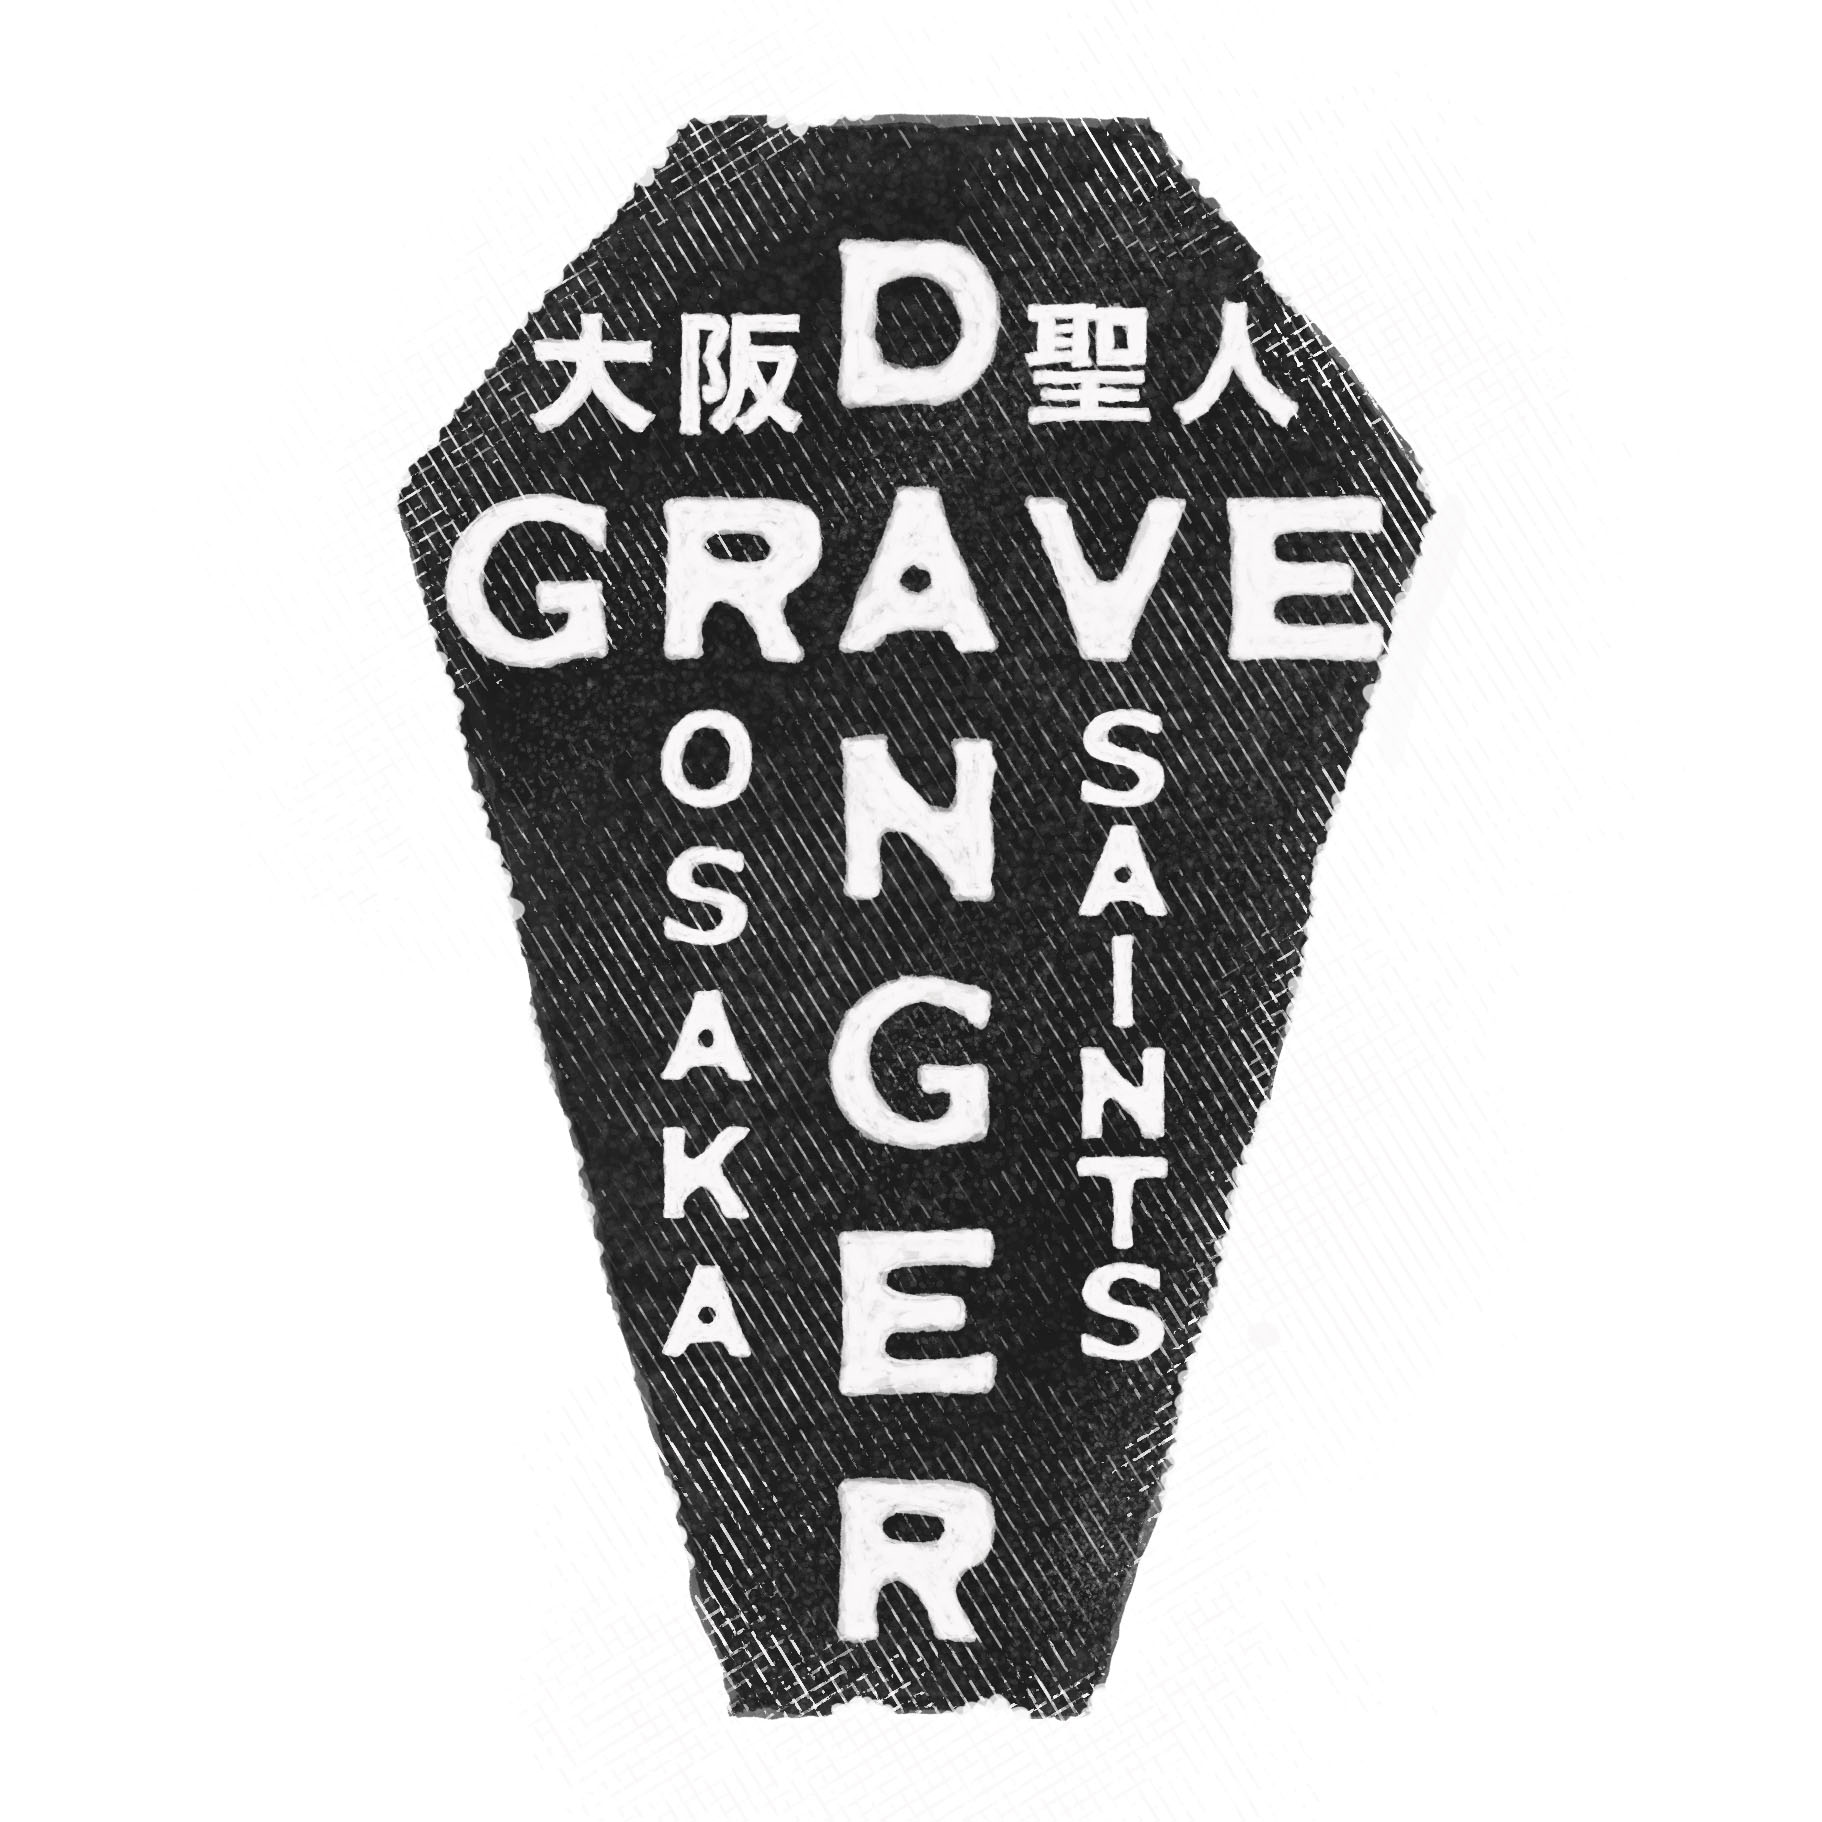 Grave Danger logo design by logo designer Moss Creative, LLC for your inspiration and for the worlds largest logo competition